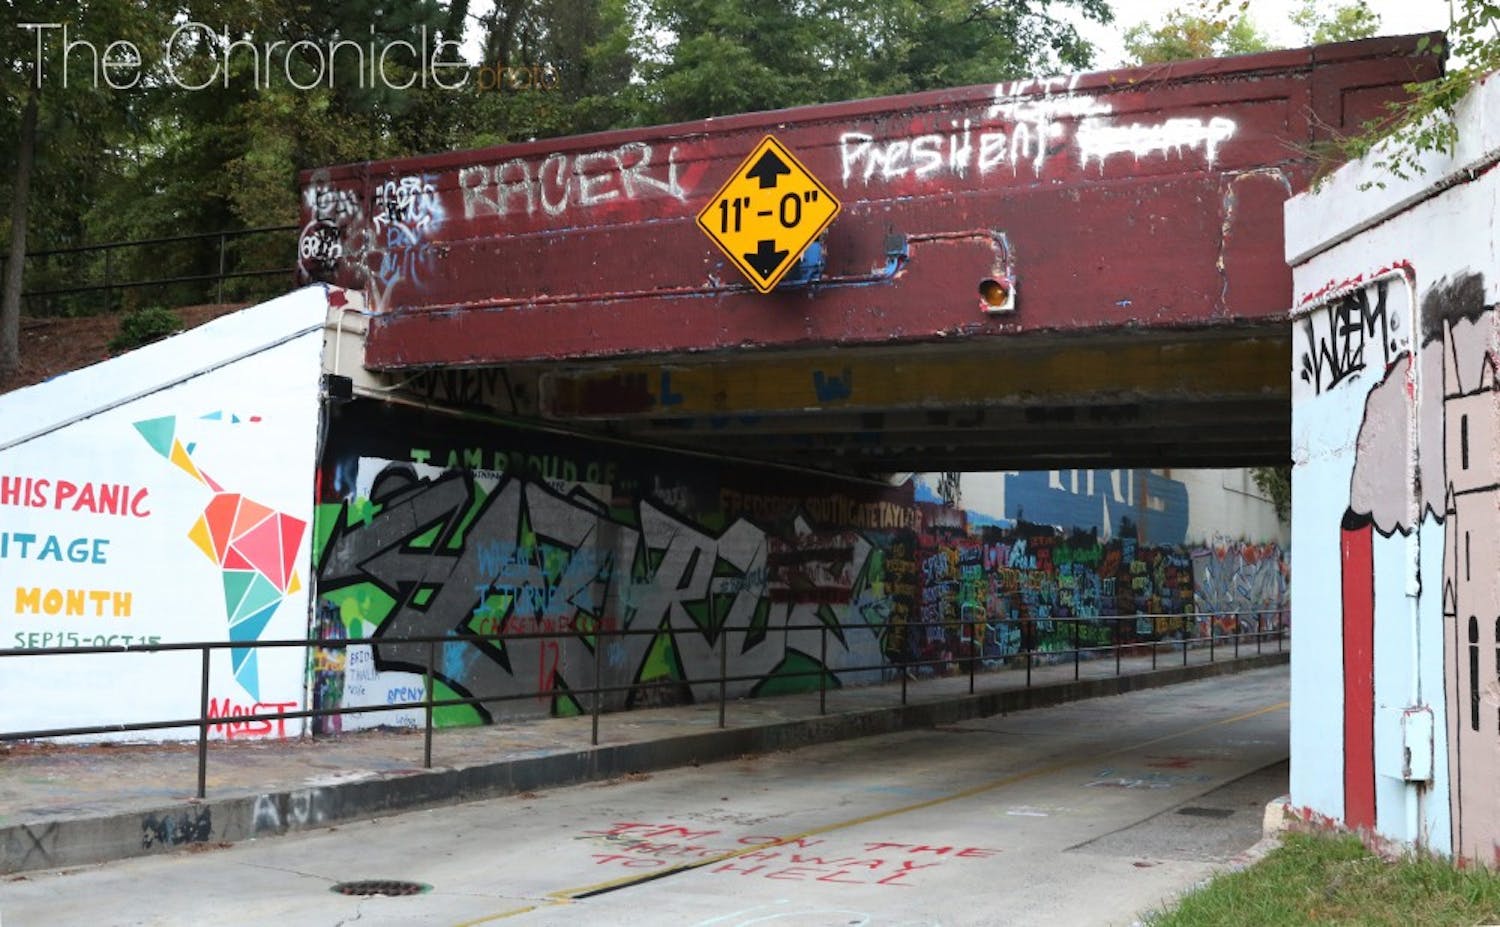 The East Campus bridge. This photo was not taken on the day of the Oct. 19 vandalism incident.